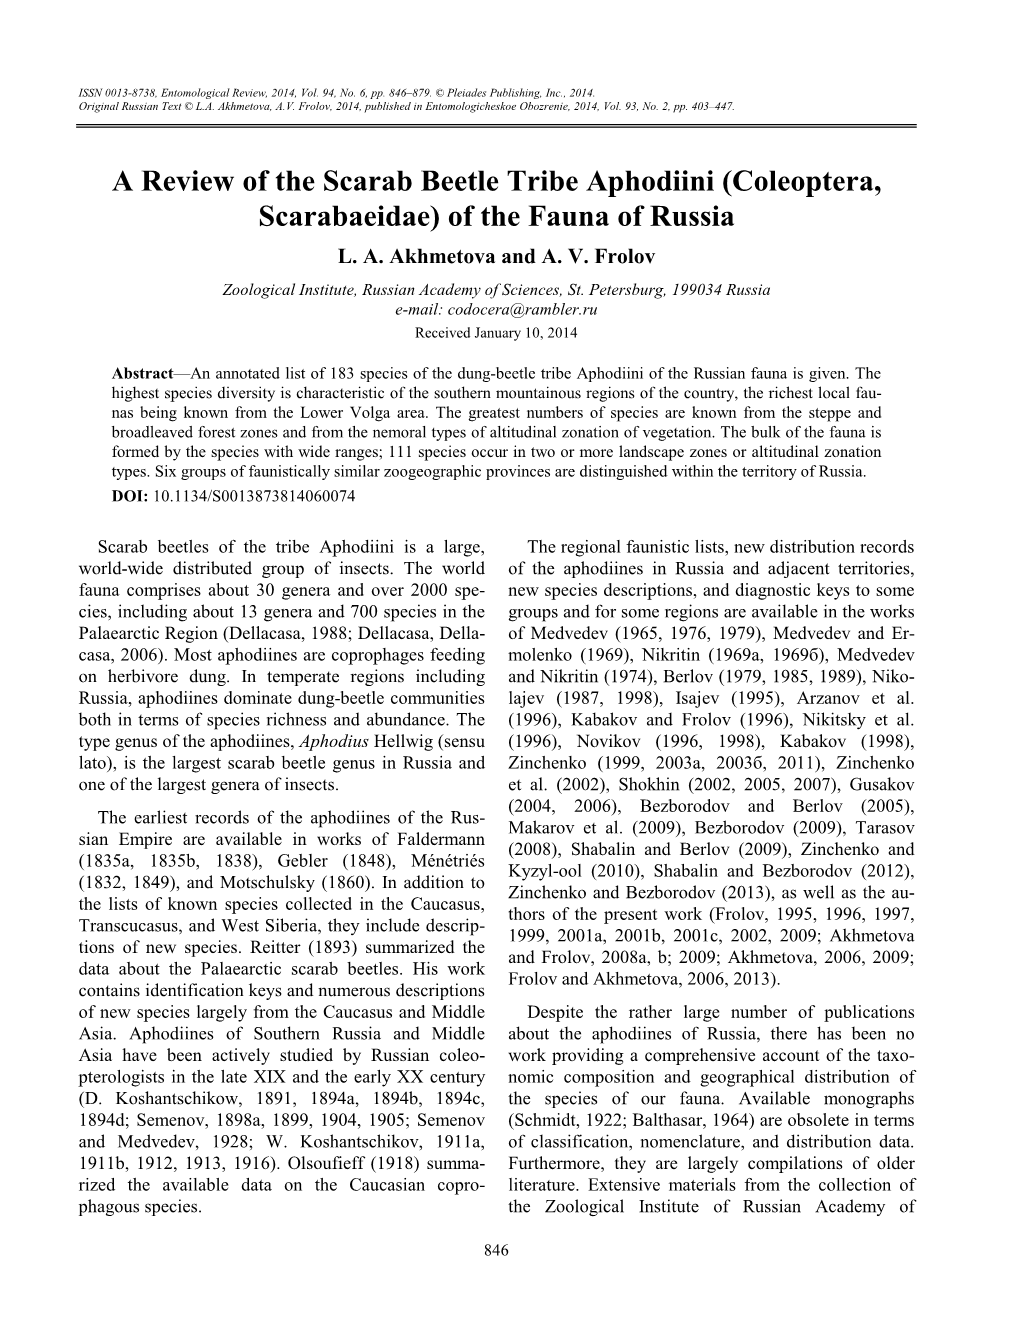 A Review of the Scarab Beetle Tribe Aphodiini (Coleoptera, Scarabaeidae) of the Fauna of Russia L